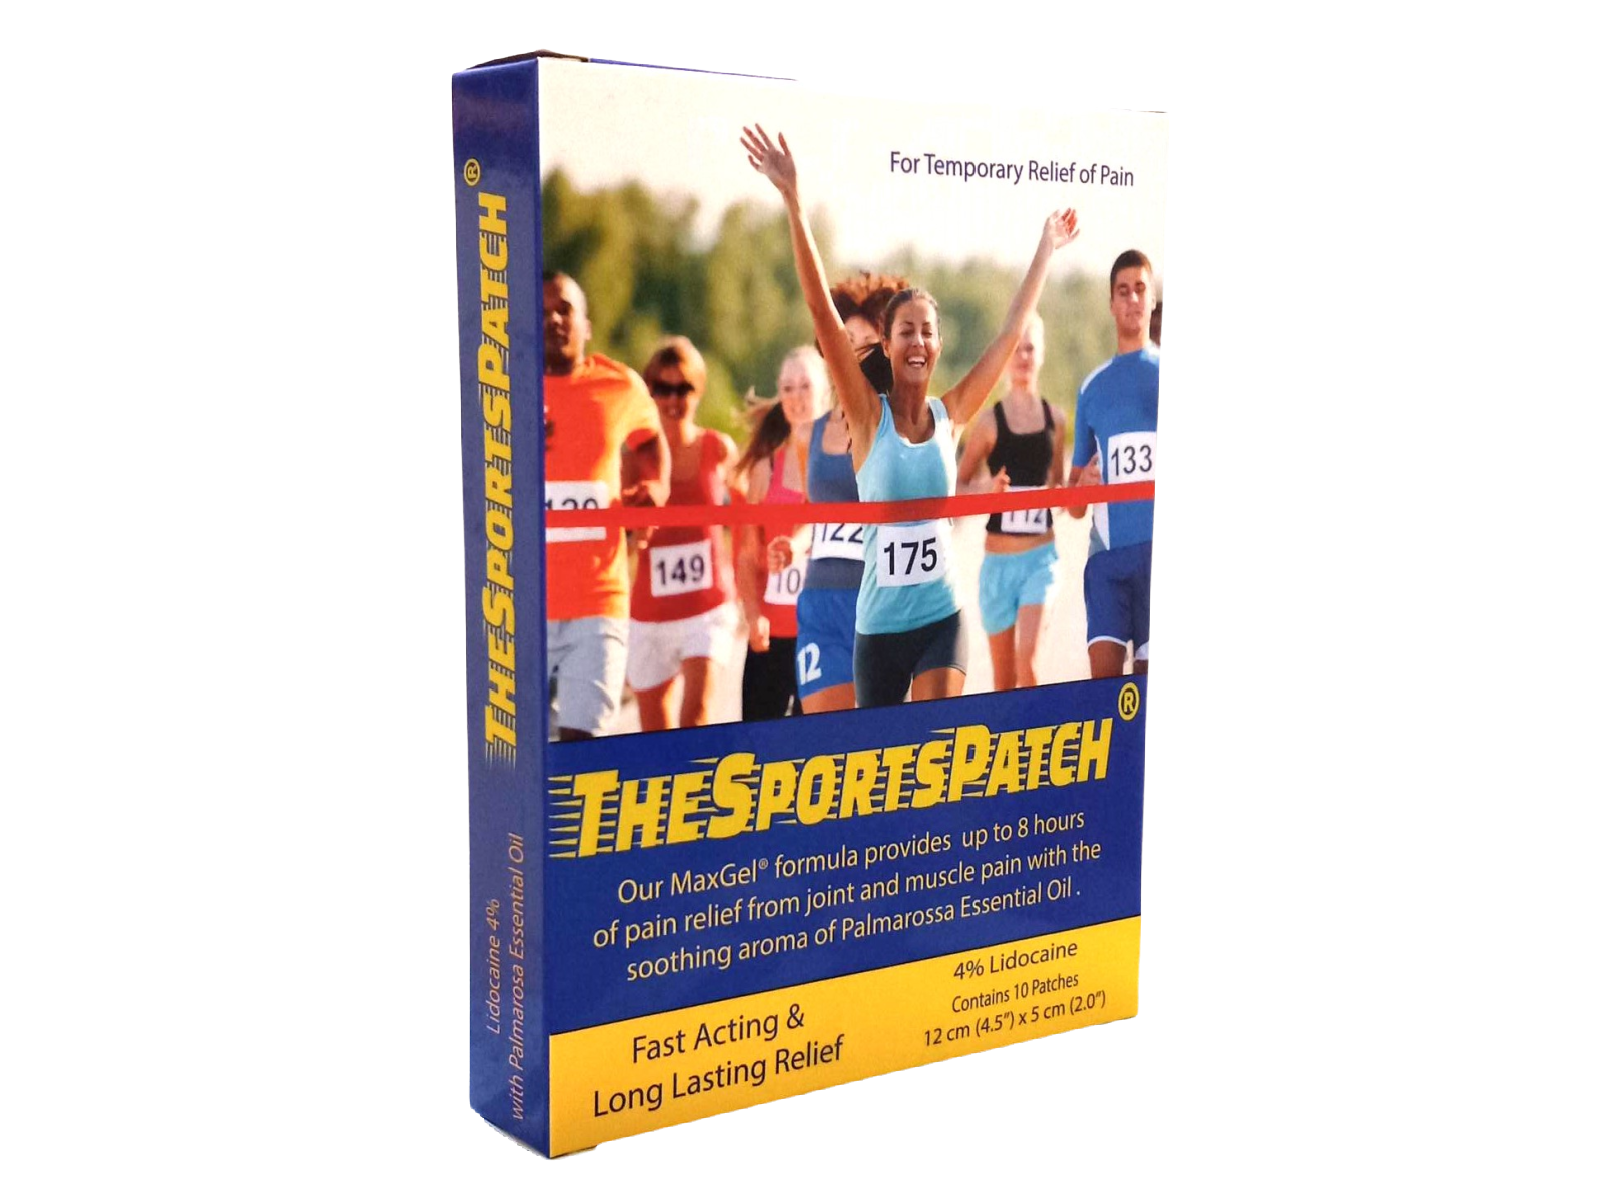 The Sports Patch® - Stay in the Game!